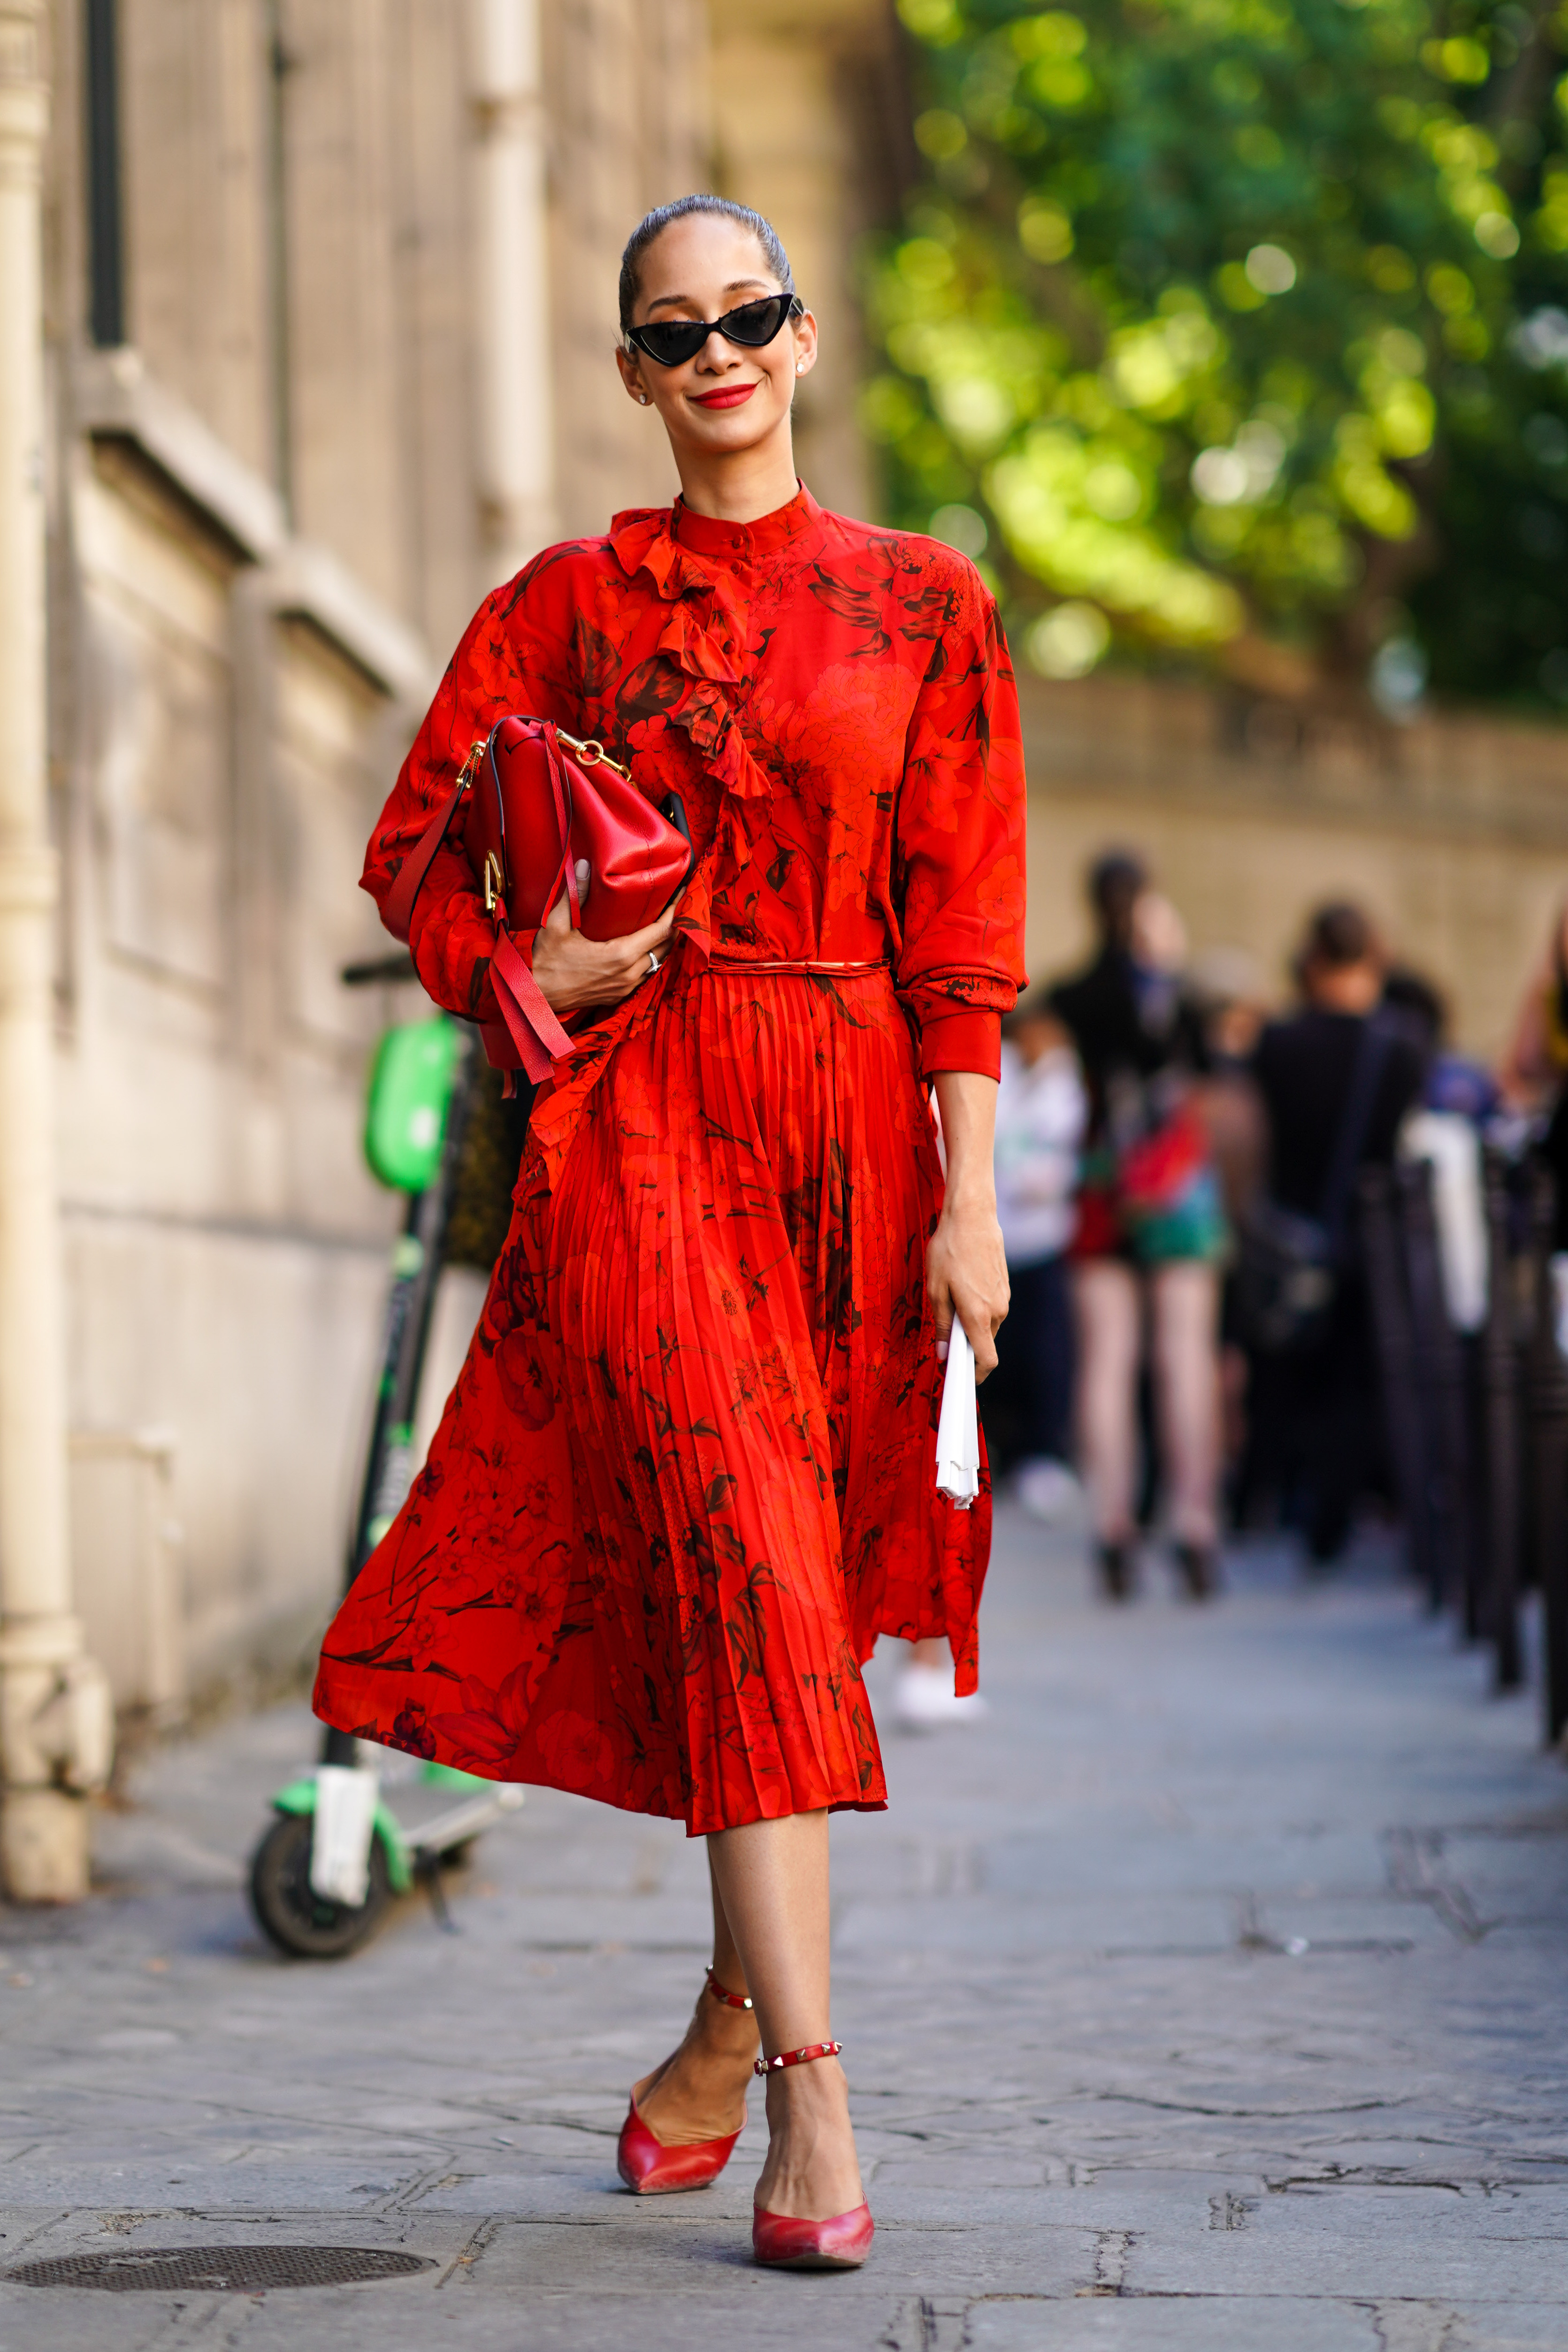 From New York to Paris: How to Dress for Fashion Month